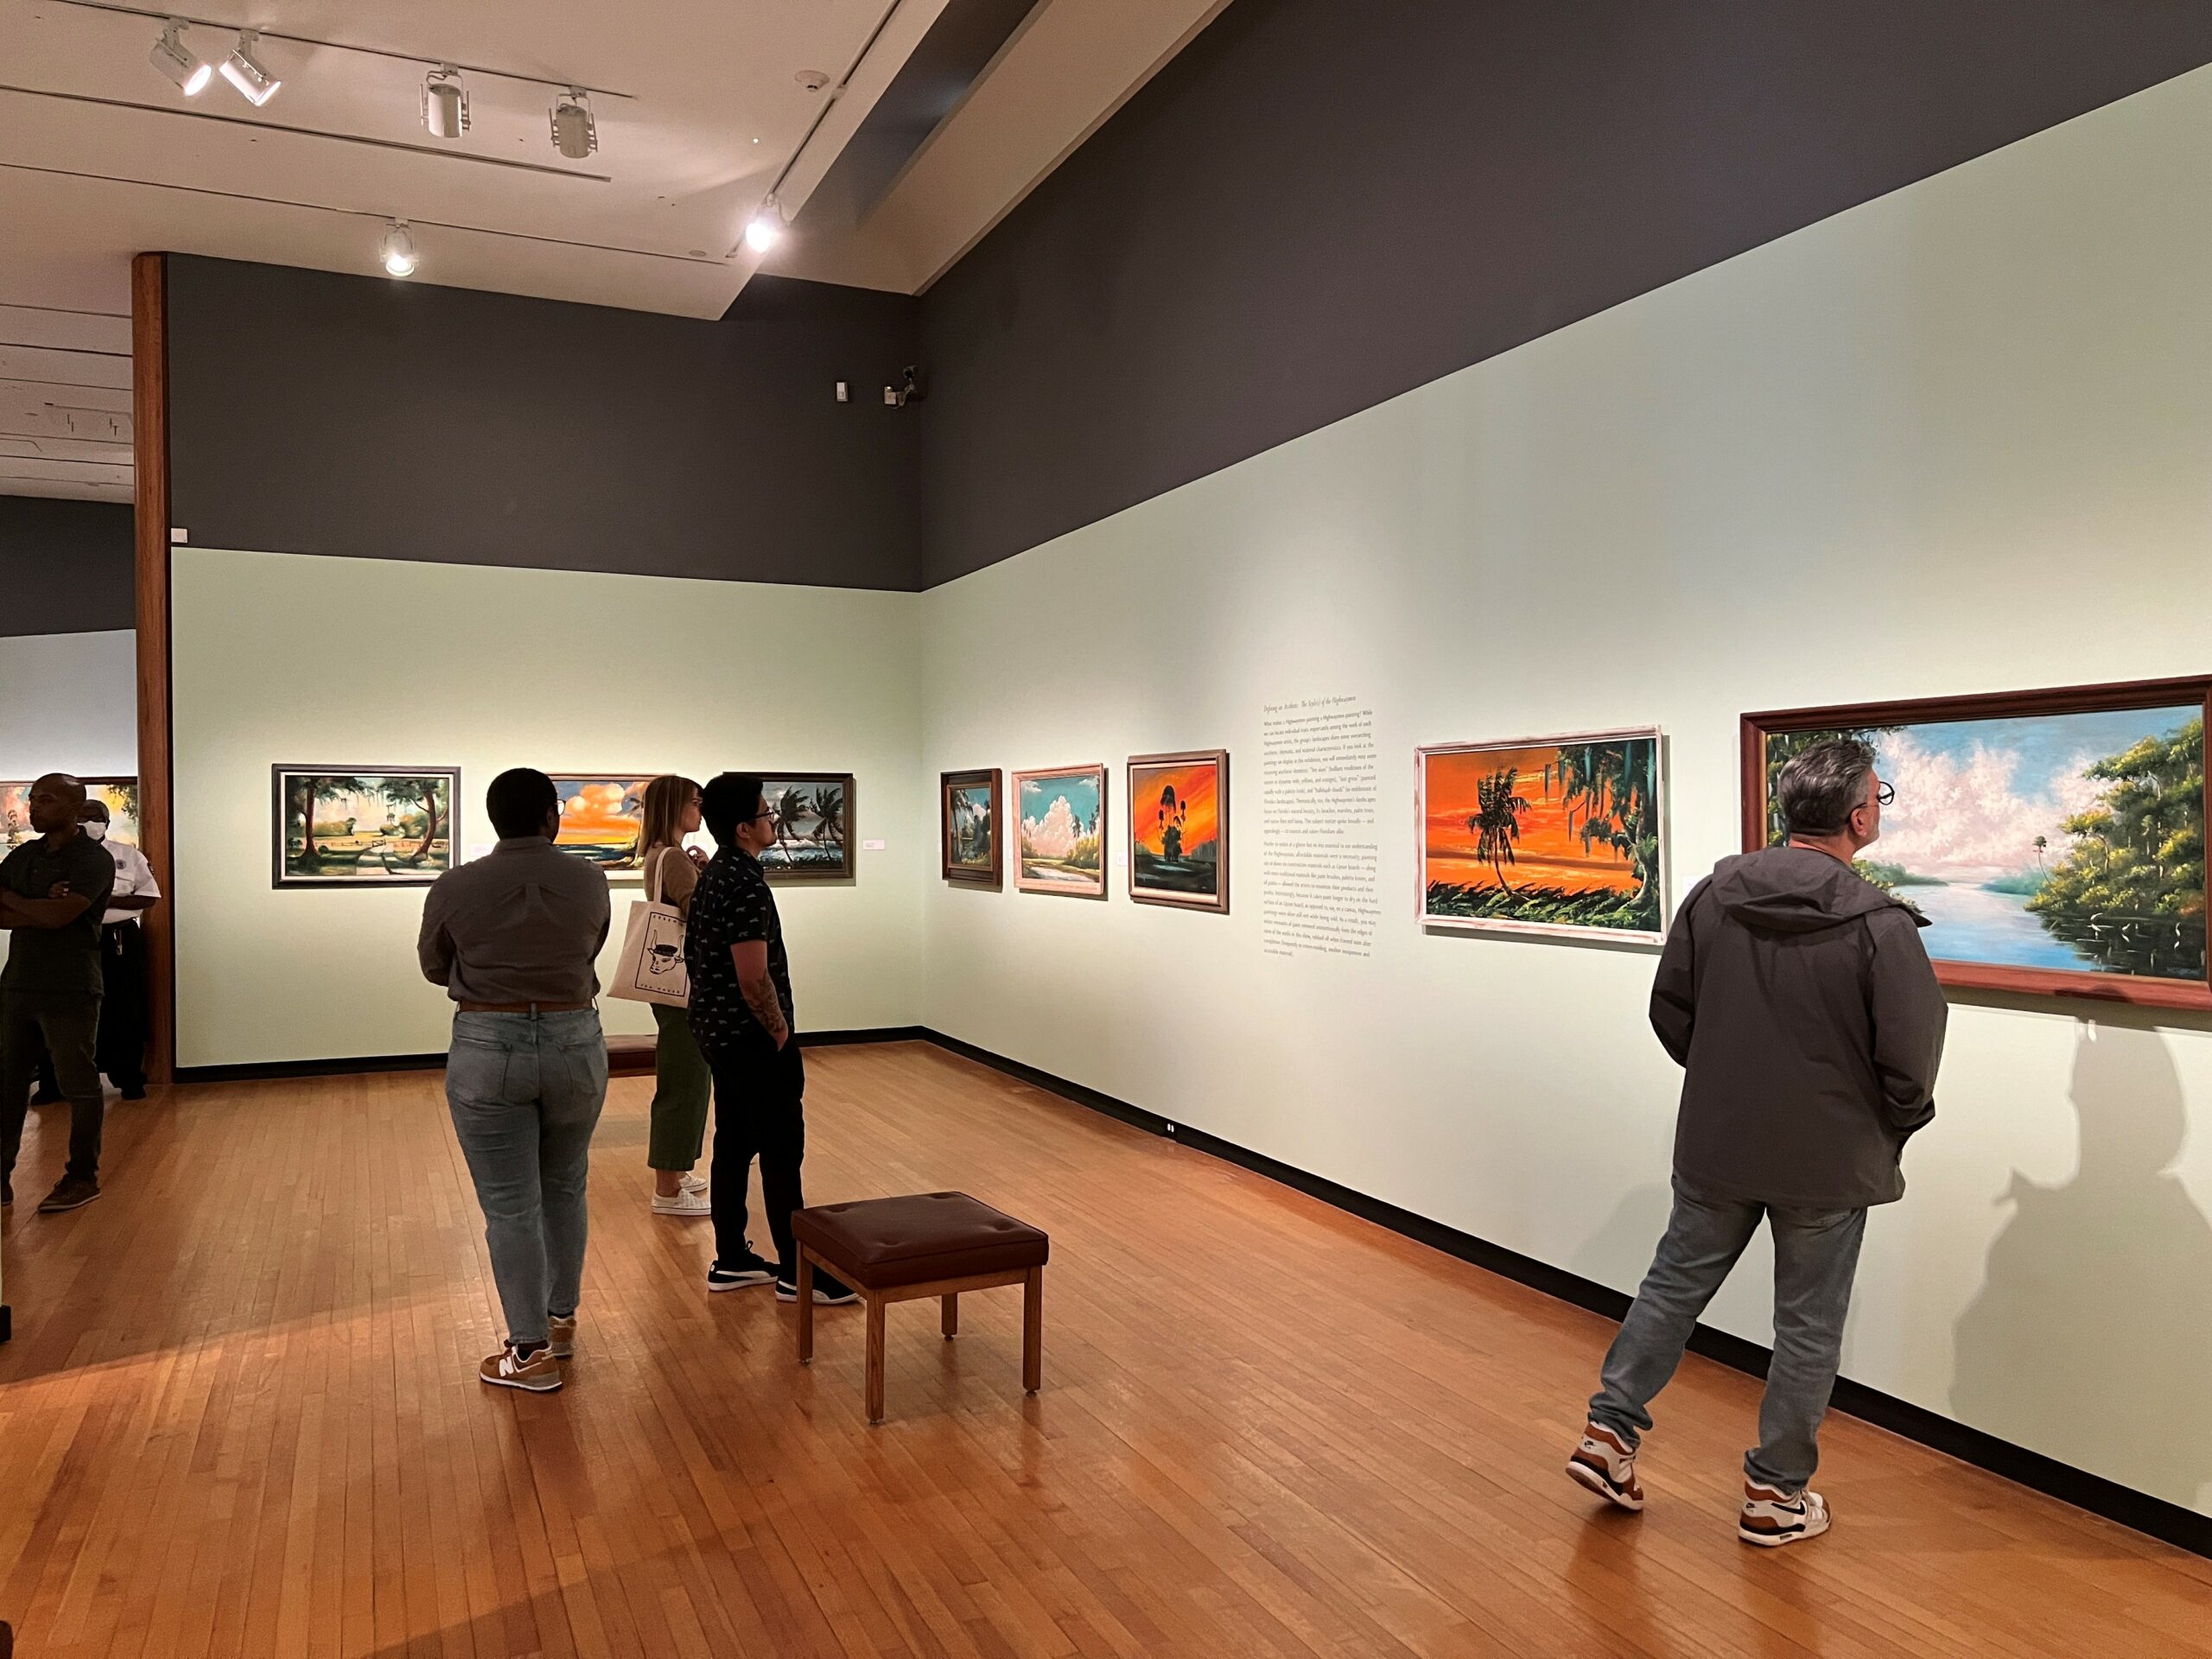 Guests in a gallery viewing works from the Highwaymen Exhibition